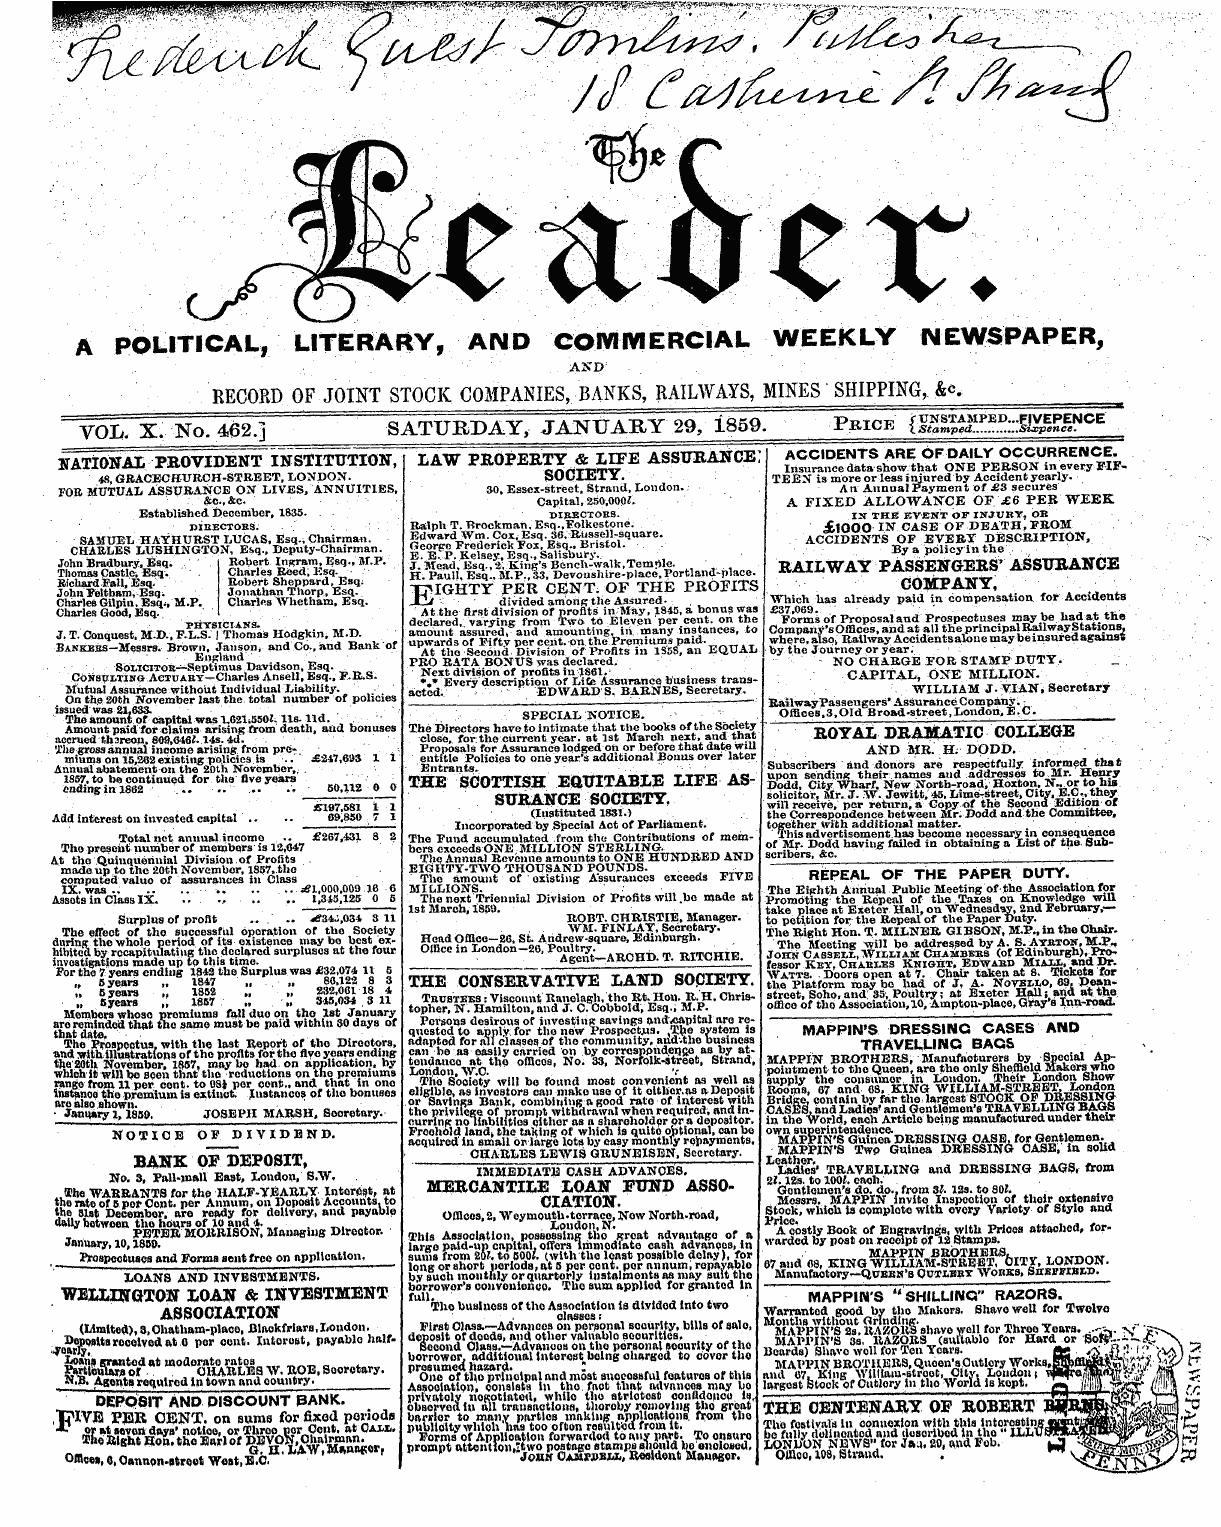 Leader (1850-1860): jS F Y, 2nd edition - Ad00115